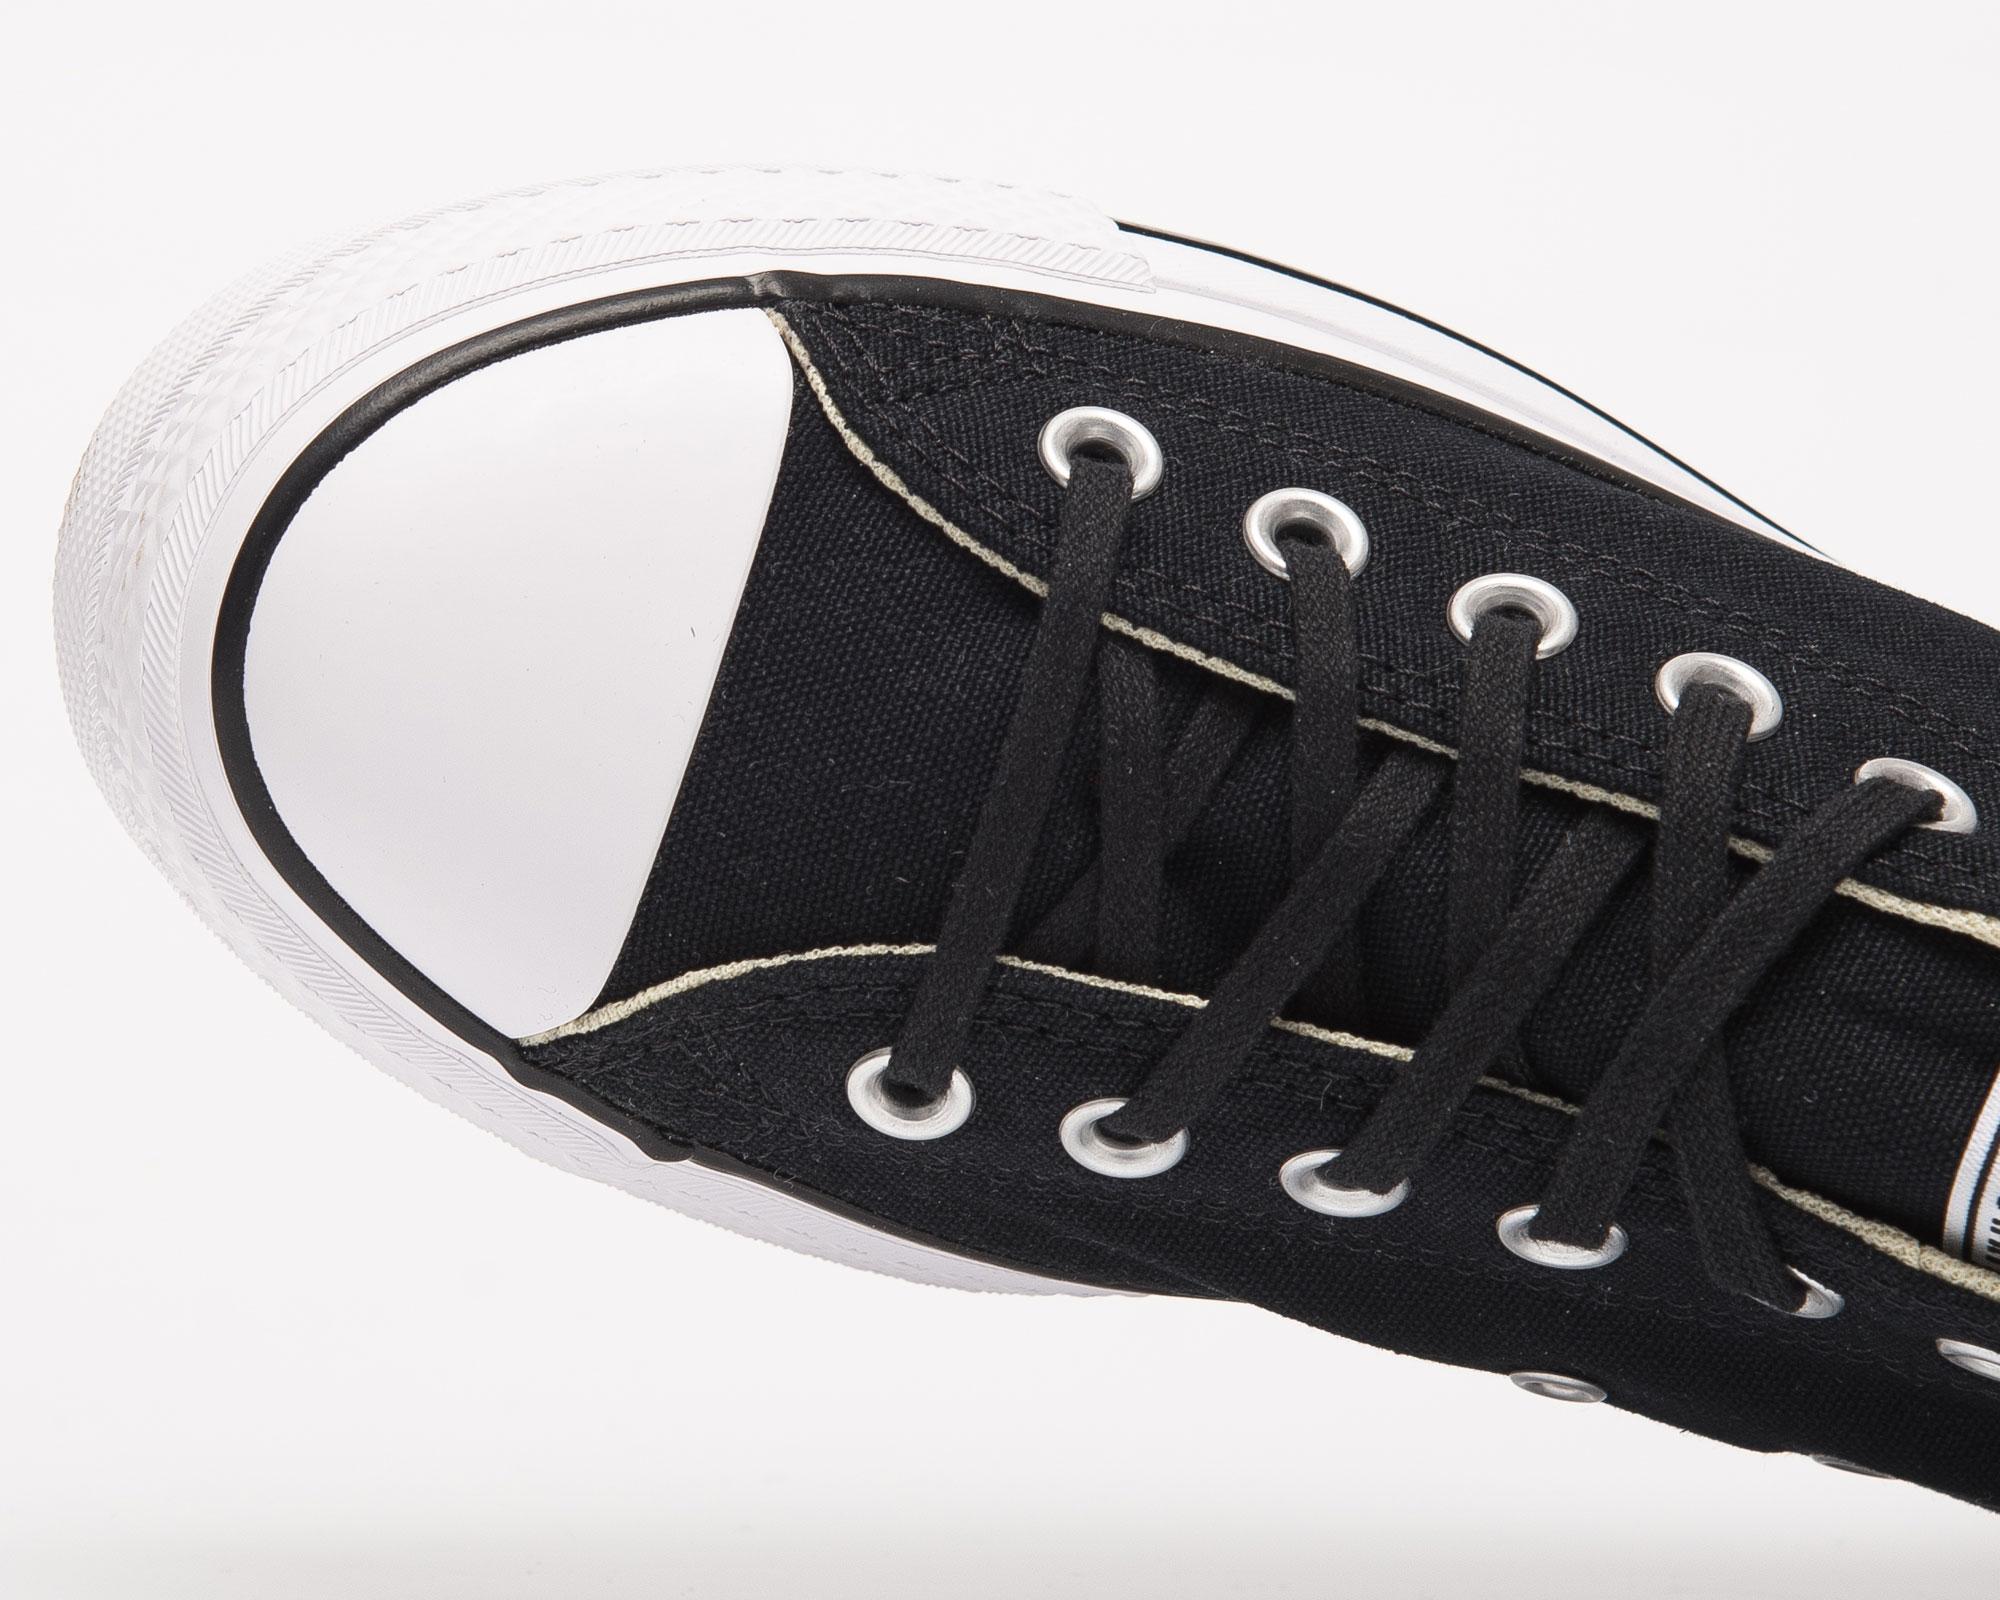 Converse Chuck Taylor All Star Lift Platform Canvas Low in Black | Lyst